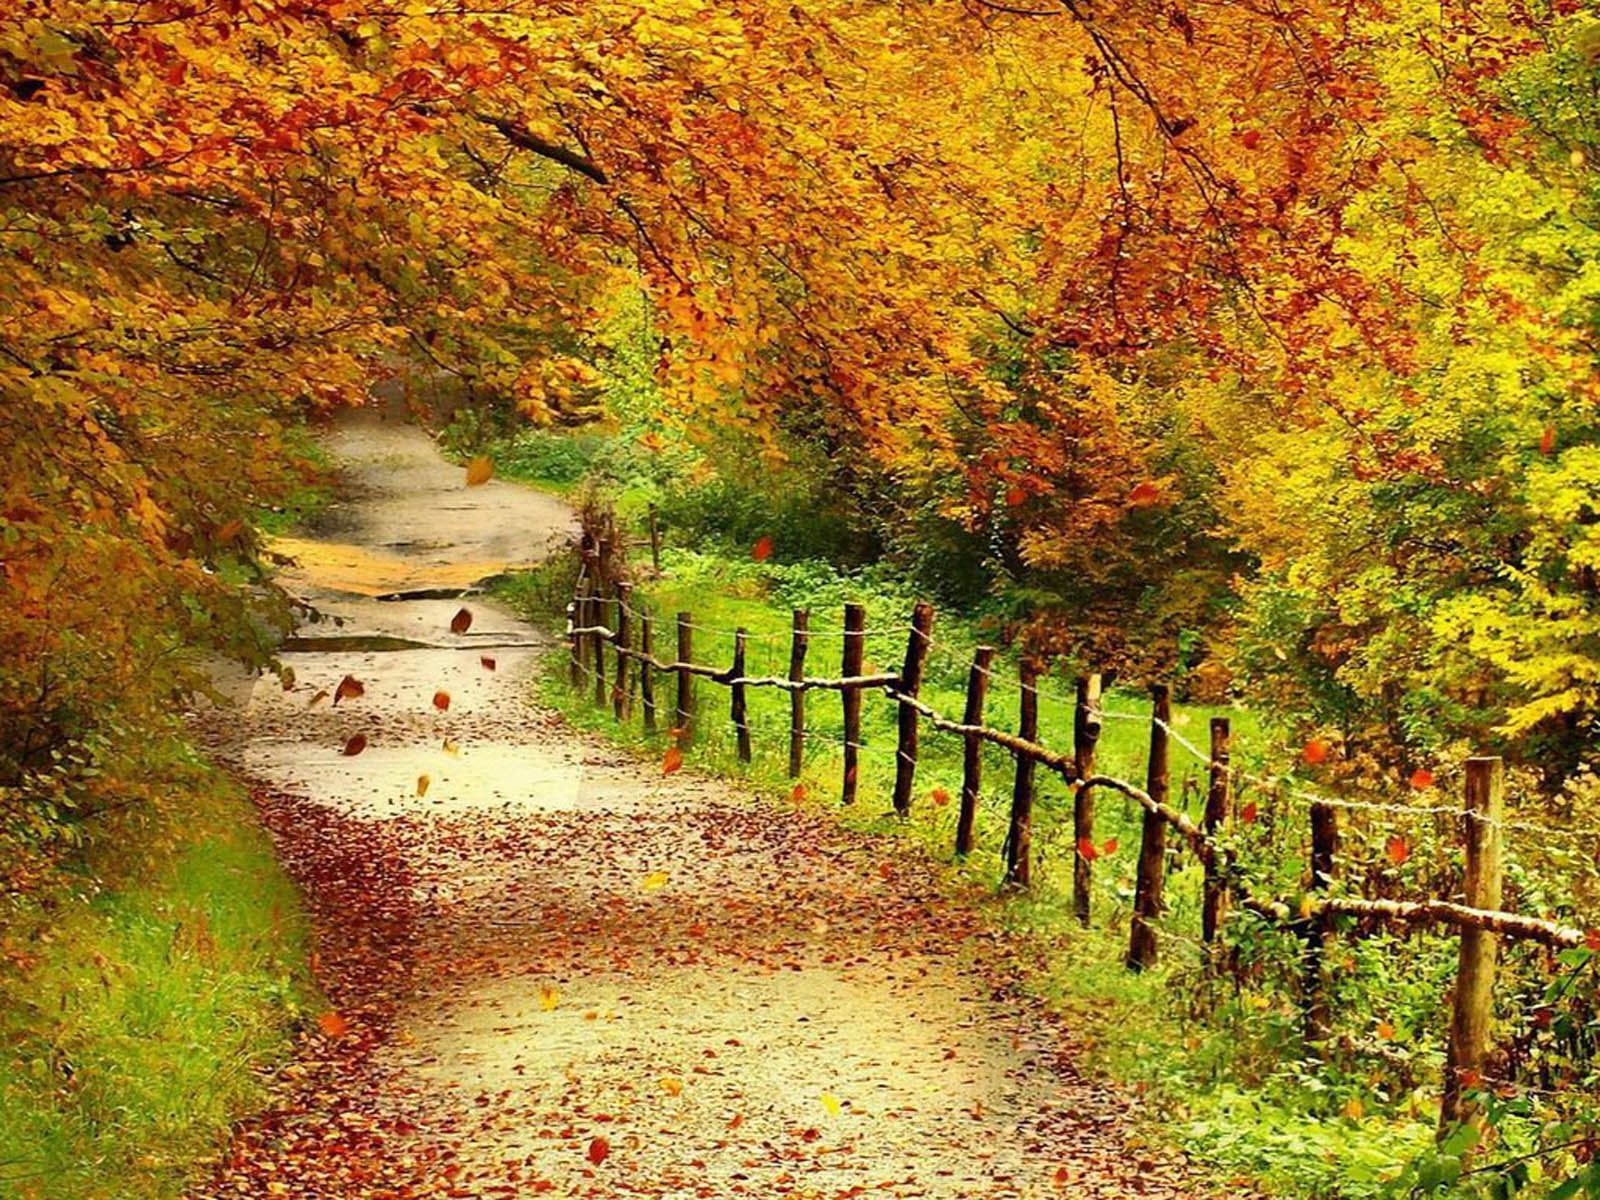 Tag Beautiful Autumn Scenery Wallpapers Backgrounds Photos Images